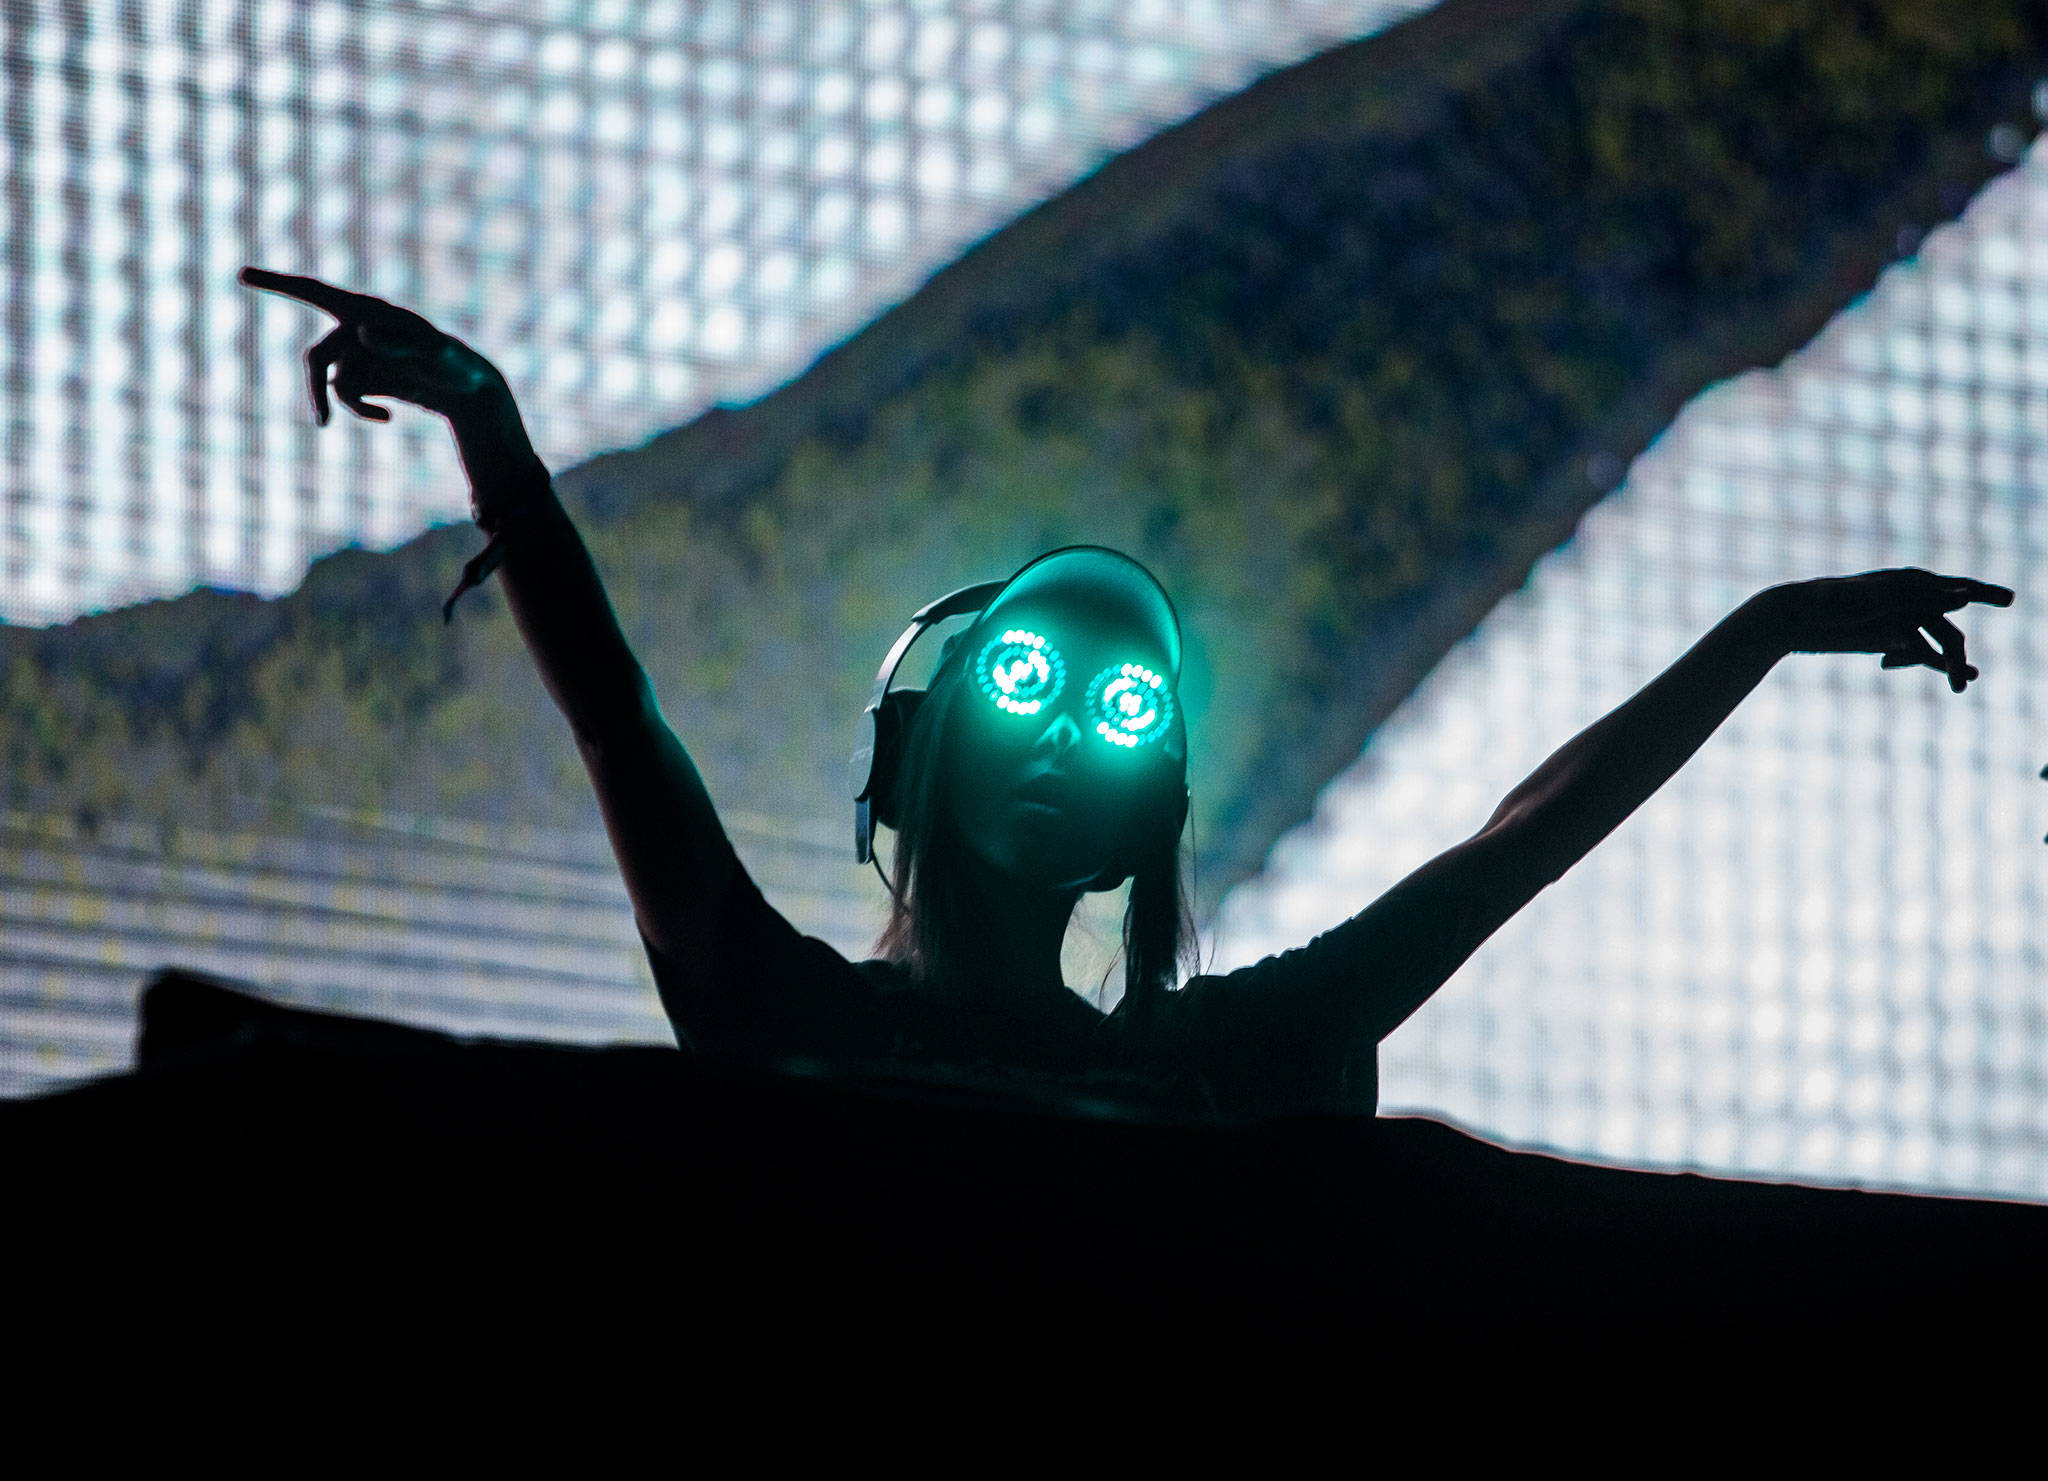 Rezz performs during Bumbershoot Music & Arts Festival on Sunday, Sept. 1, 2019 in Seattle, Wash. (Olivia Vanni / The Herald)